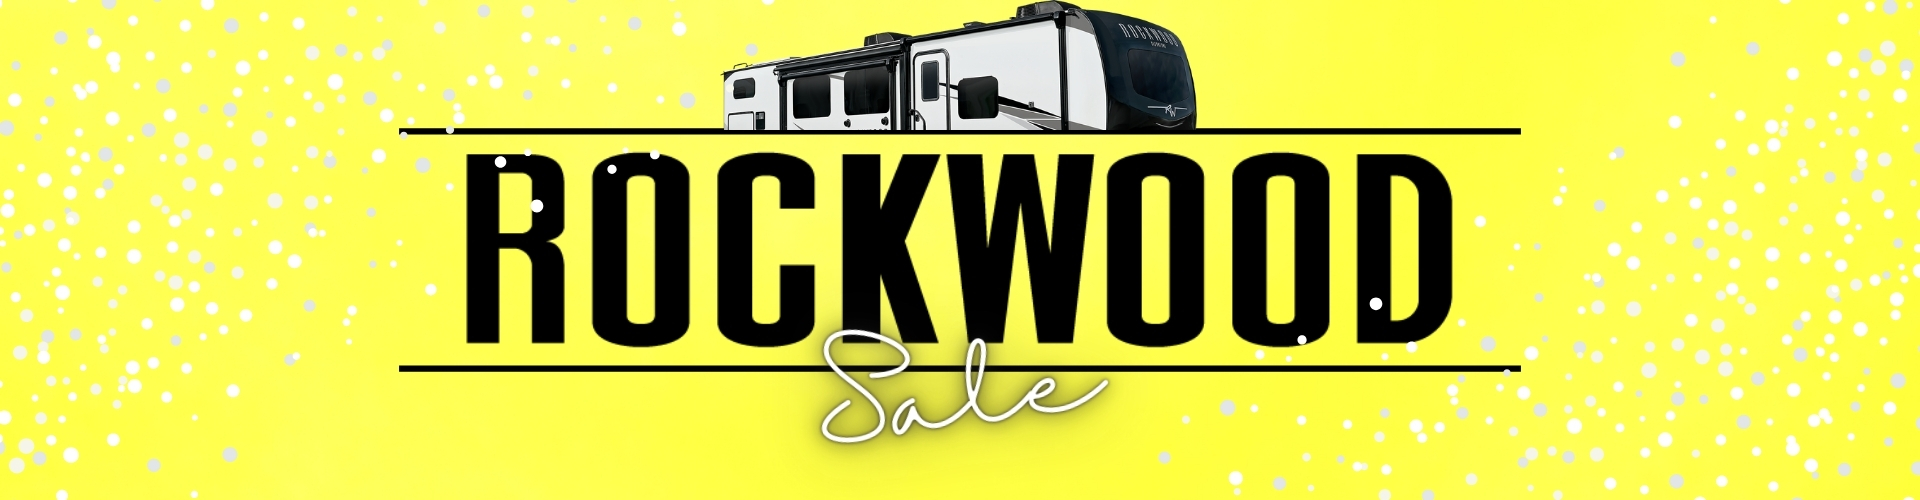 The Rockwood Sale is ON NOW!